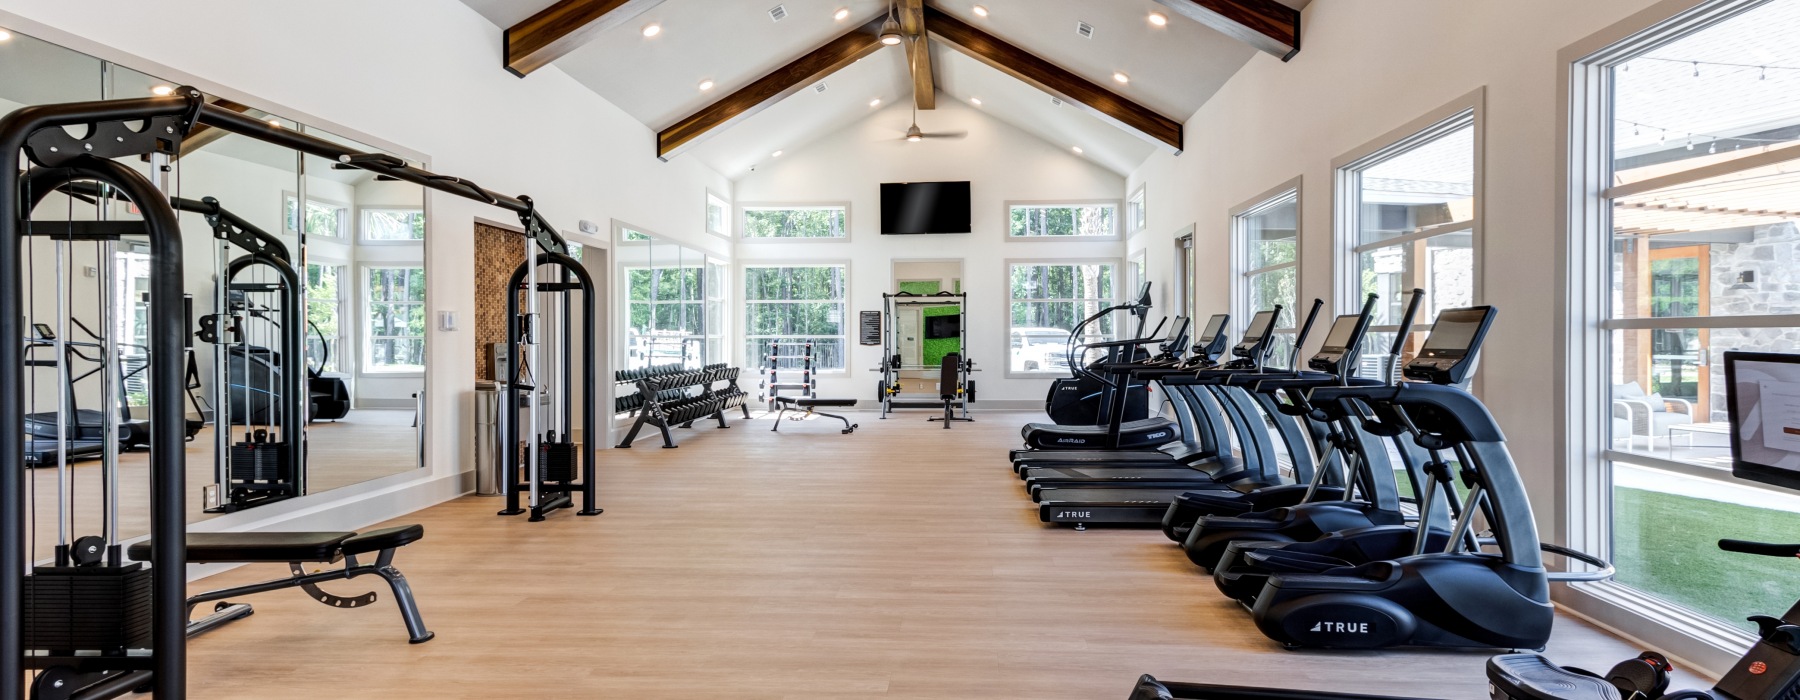 Fitness Center with vaulted ceiling